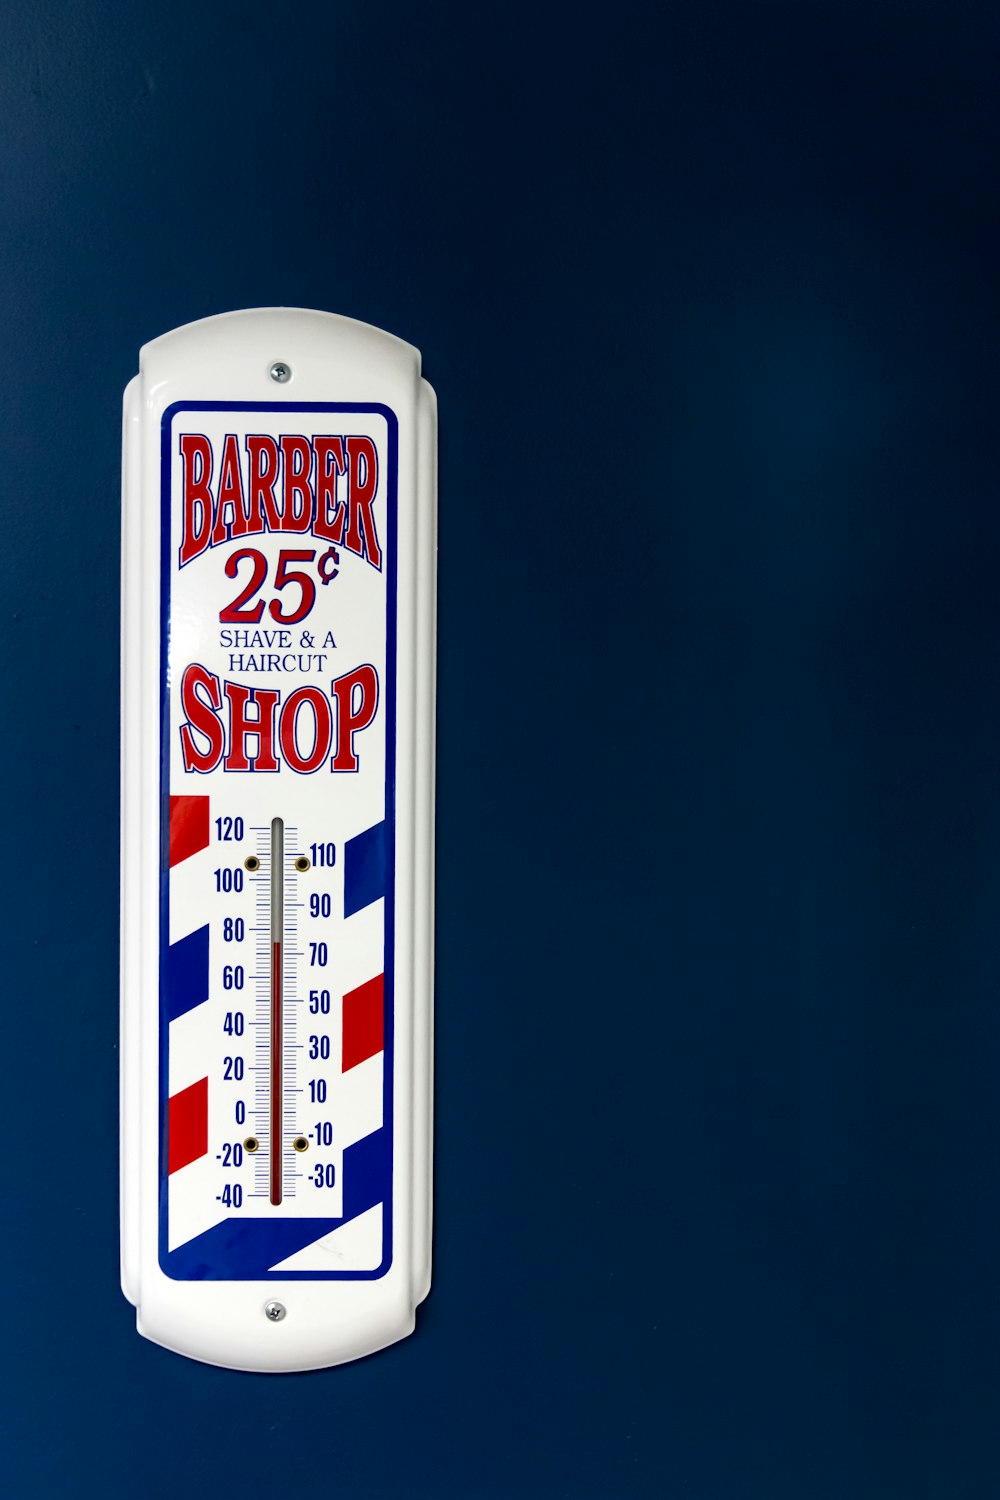 Barber shop thermometer